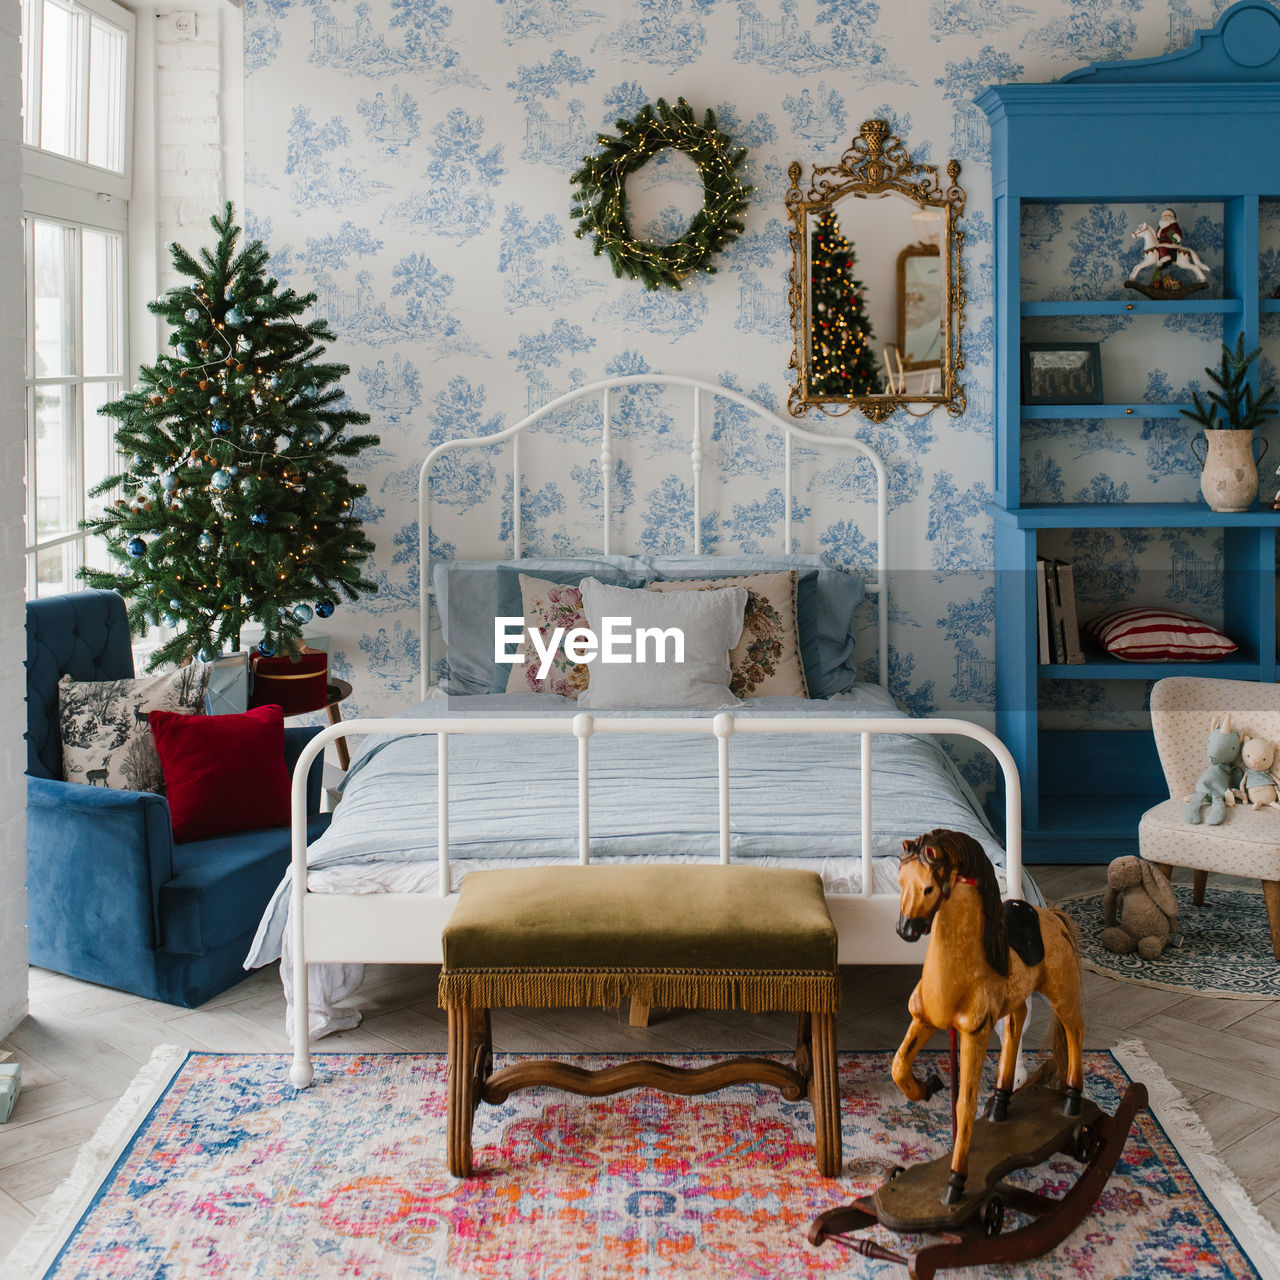 Christmas bedroom interior in blue tones. a cozy home moment on the eve of the holiday